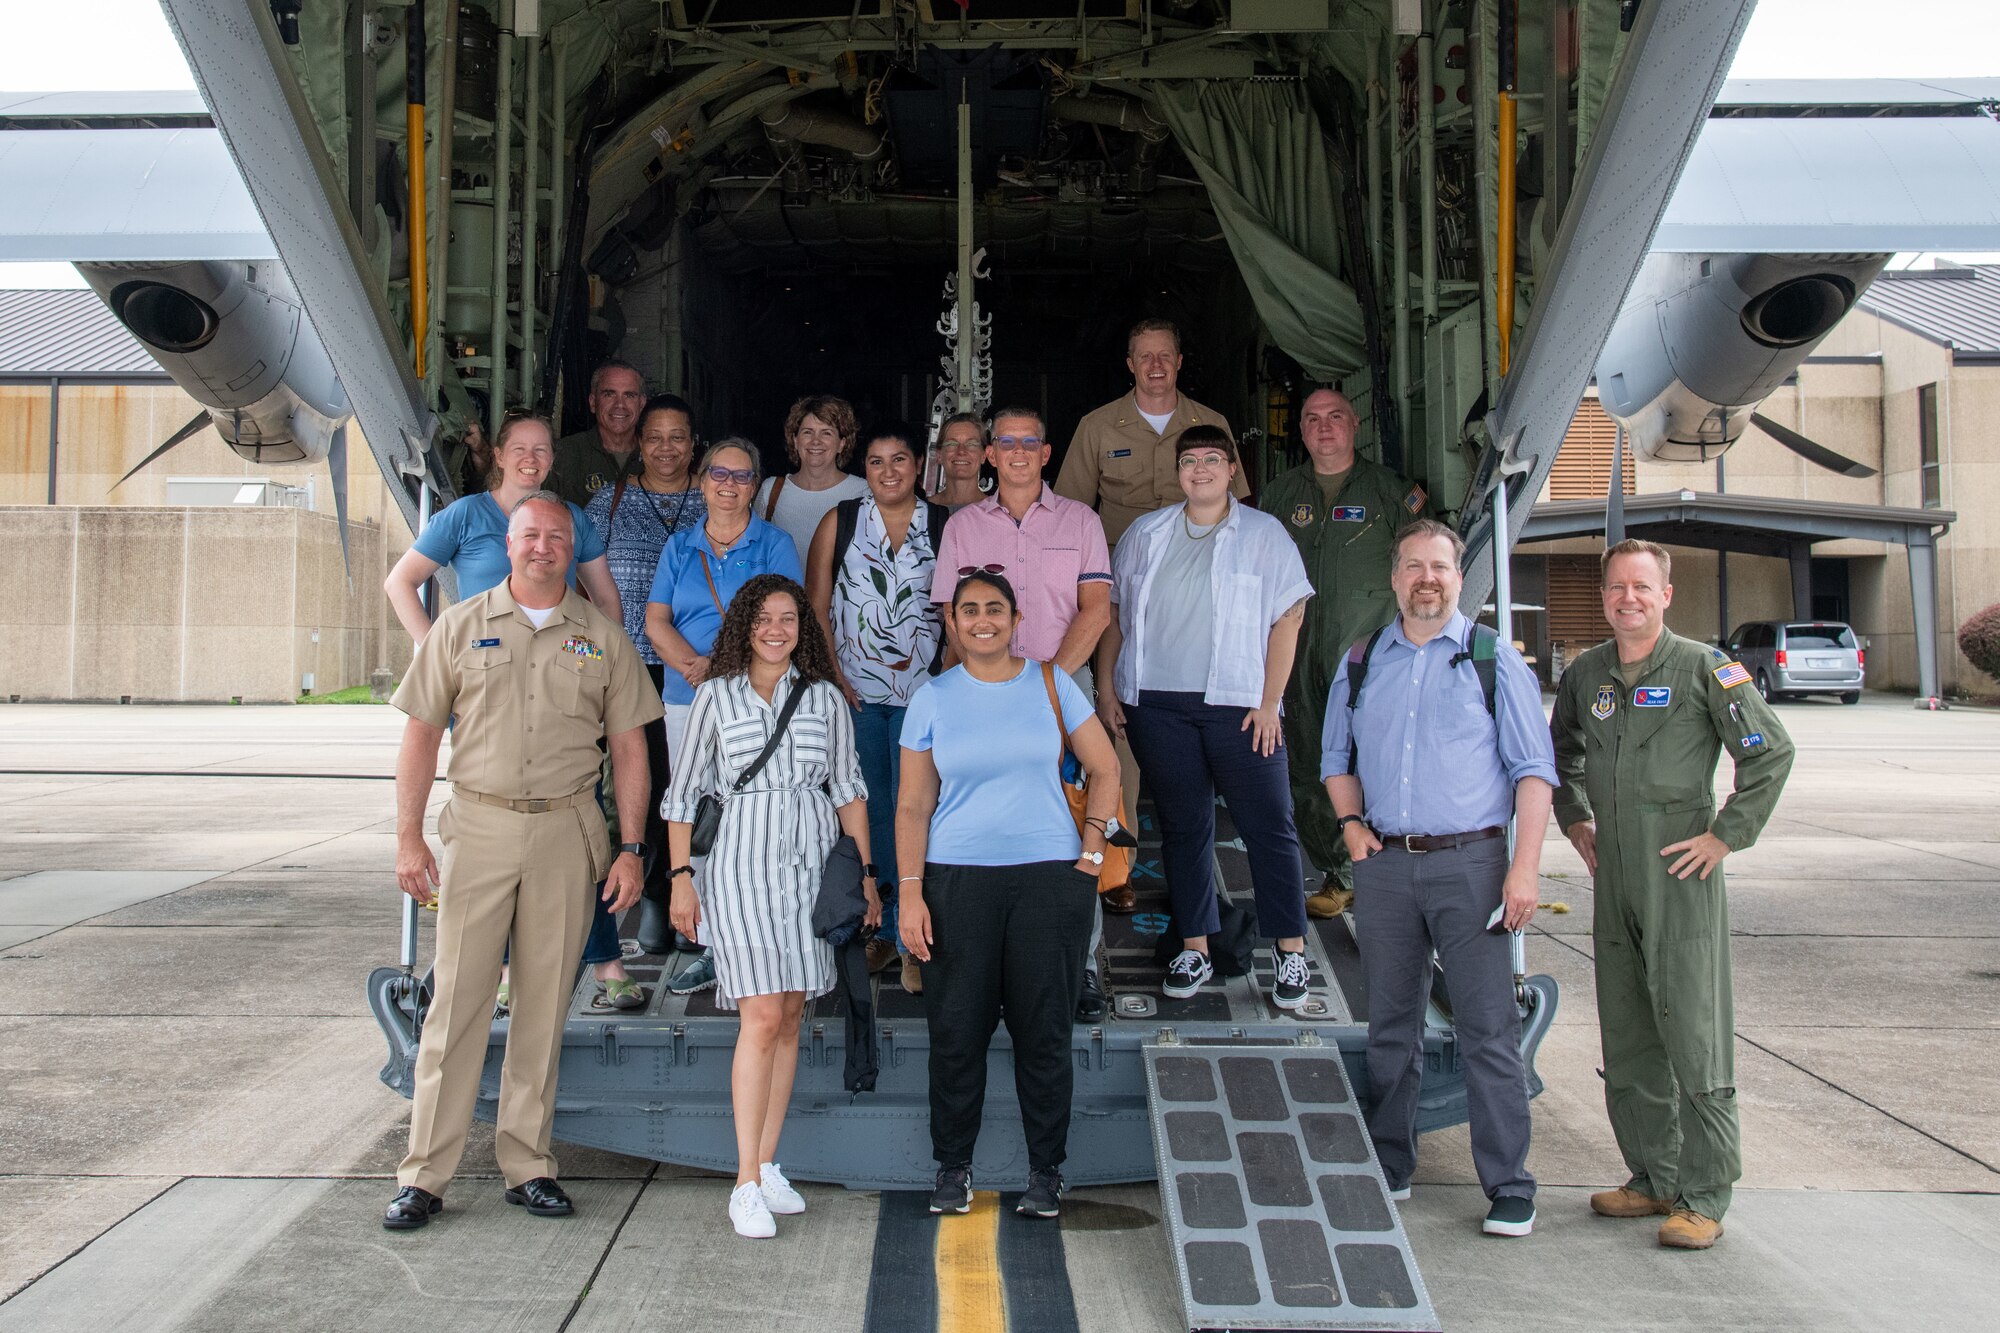 A group poses for a photo on the ramp of a WC-130J aircraft